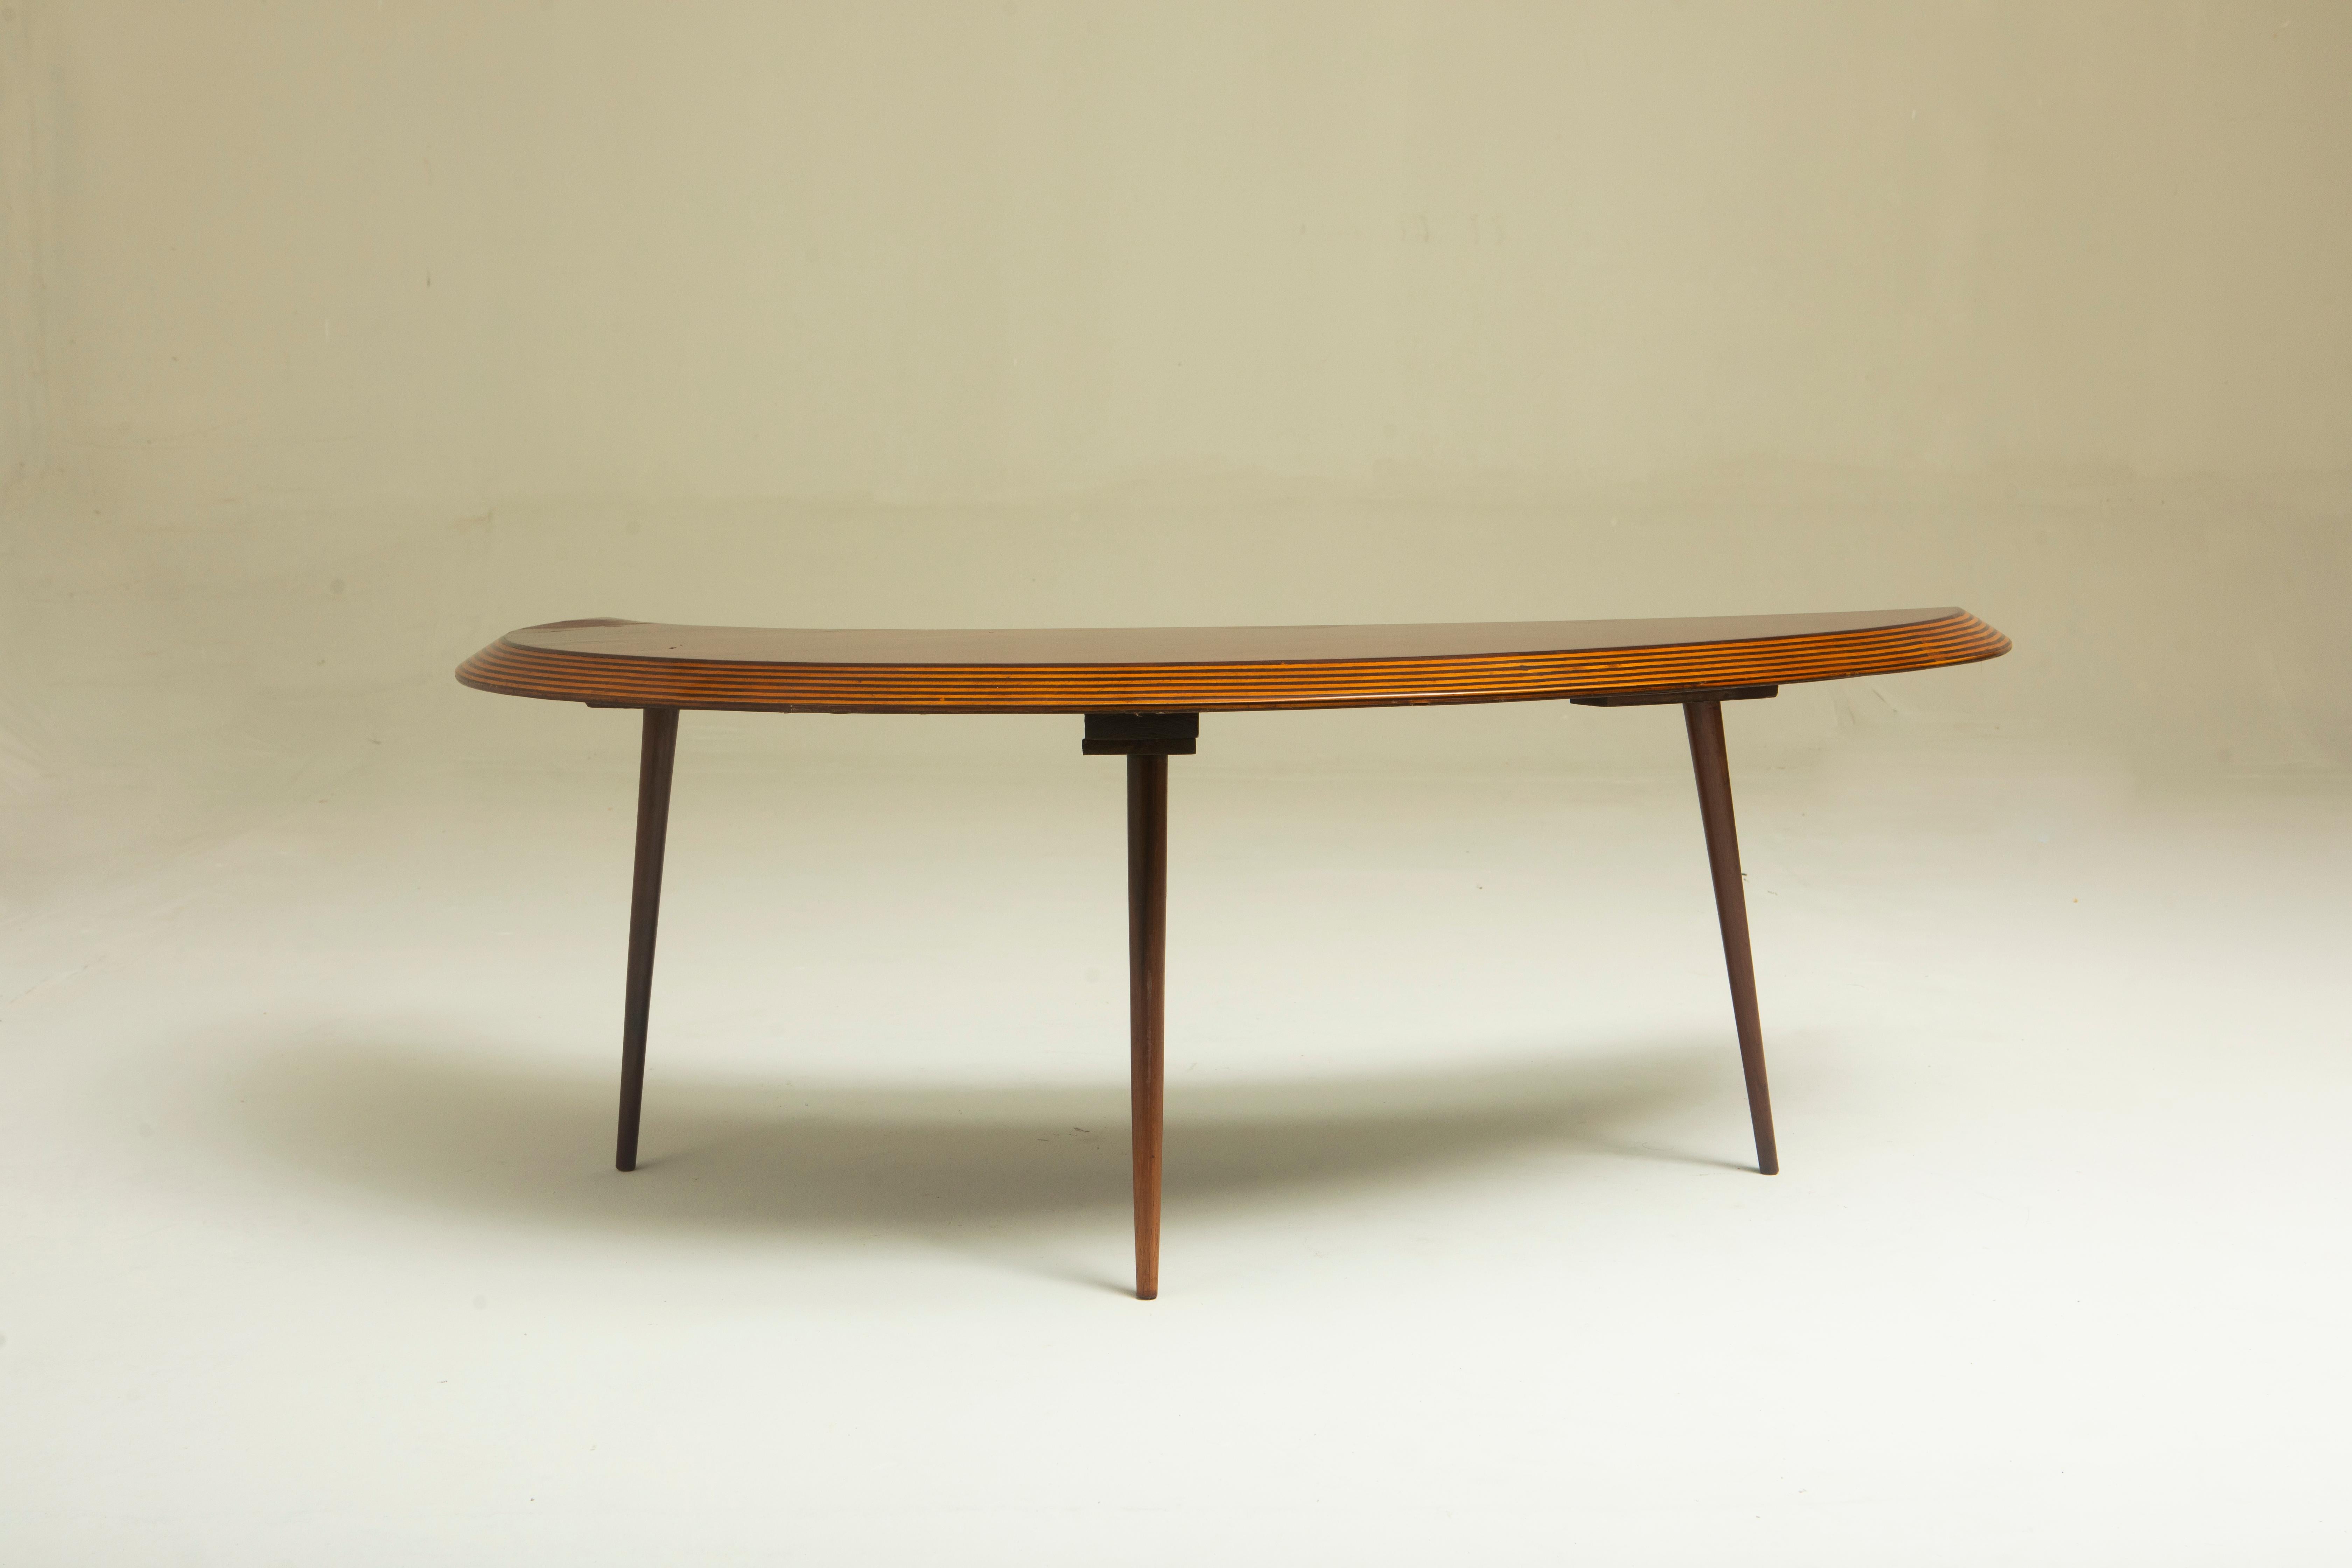 Wood 'Half Moon' Center Table by CIMO Studio, Brazil, 1950s For Sale